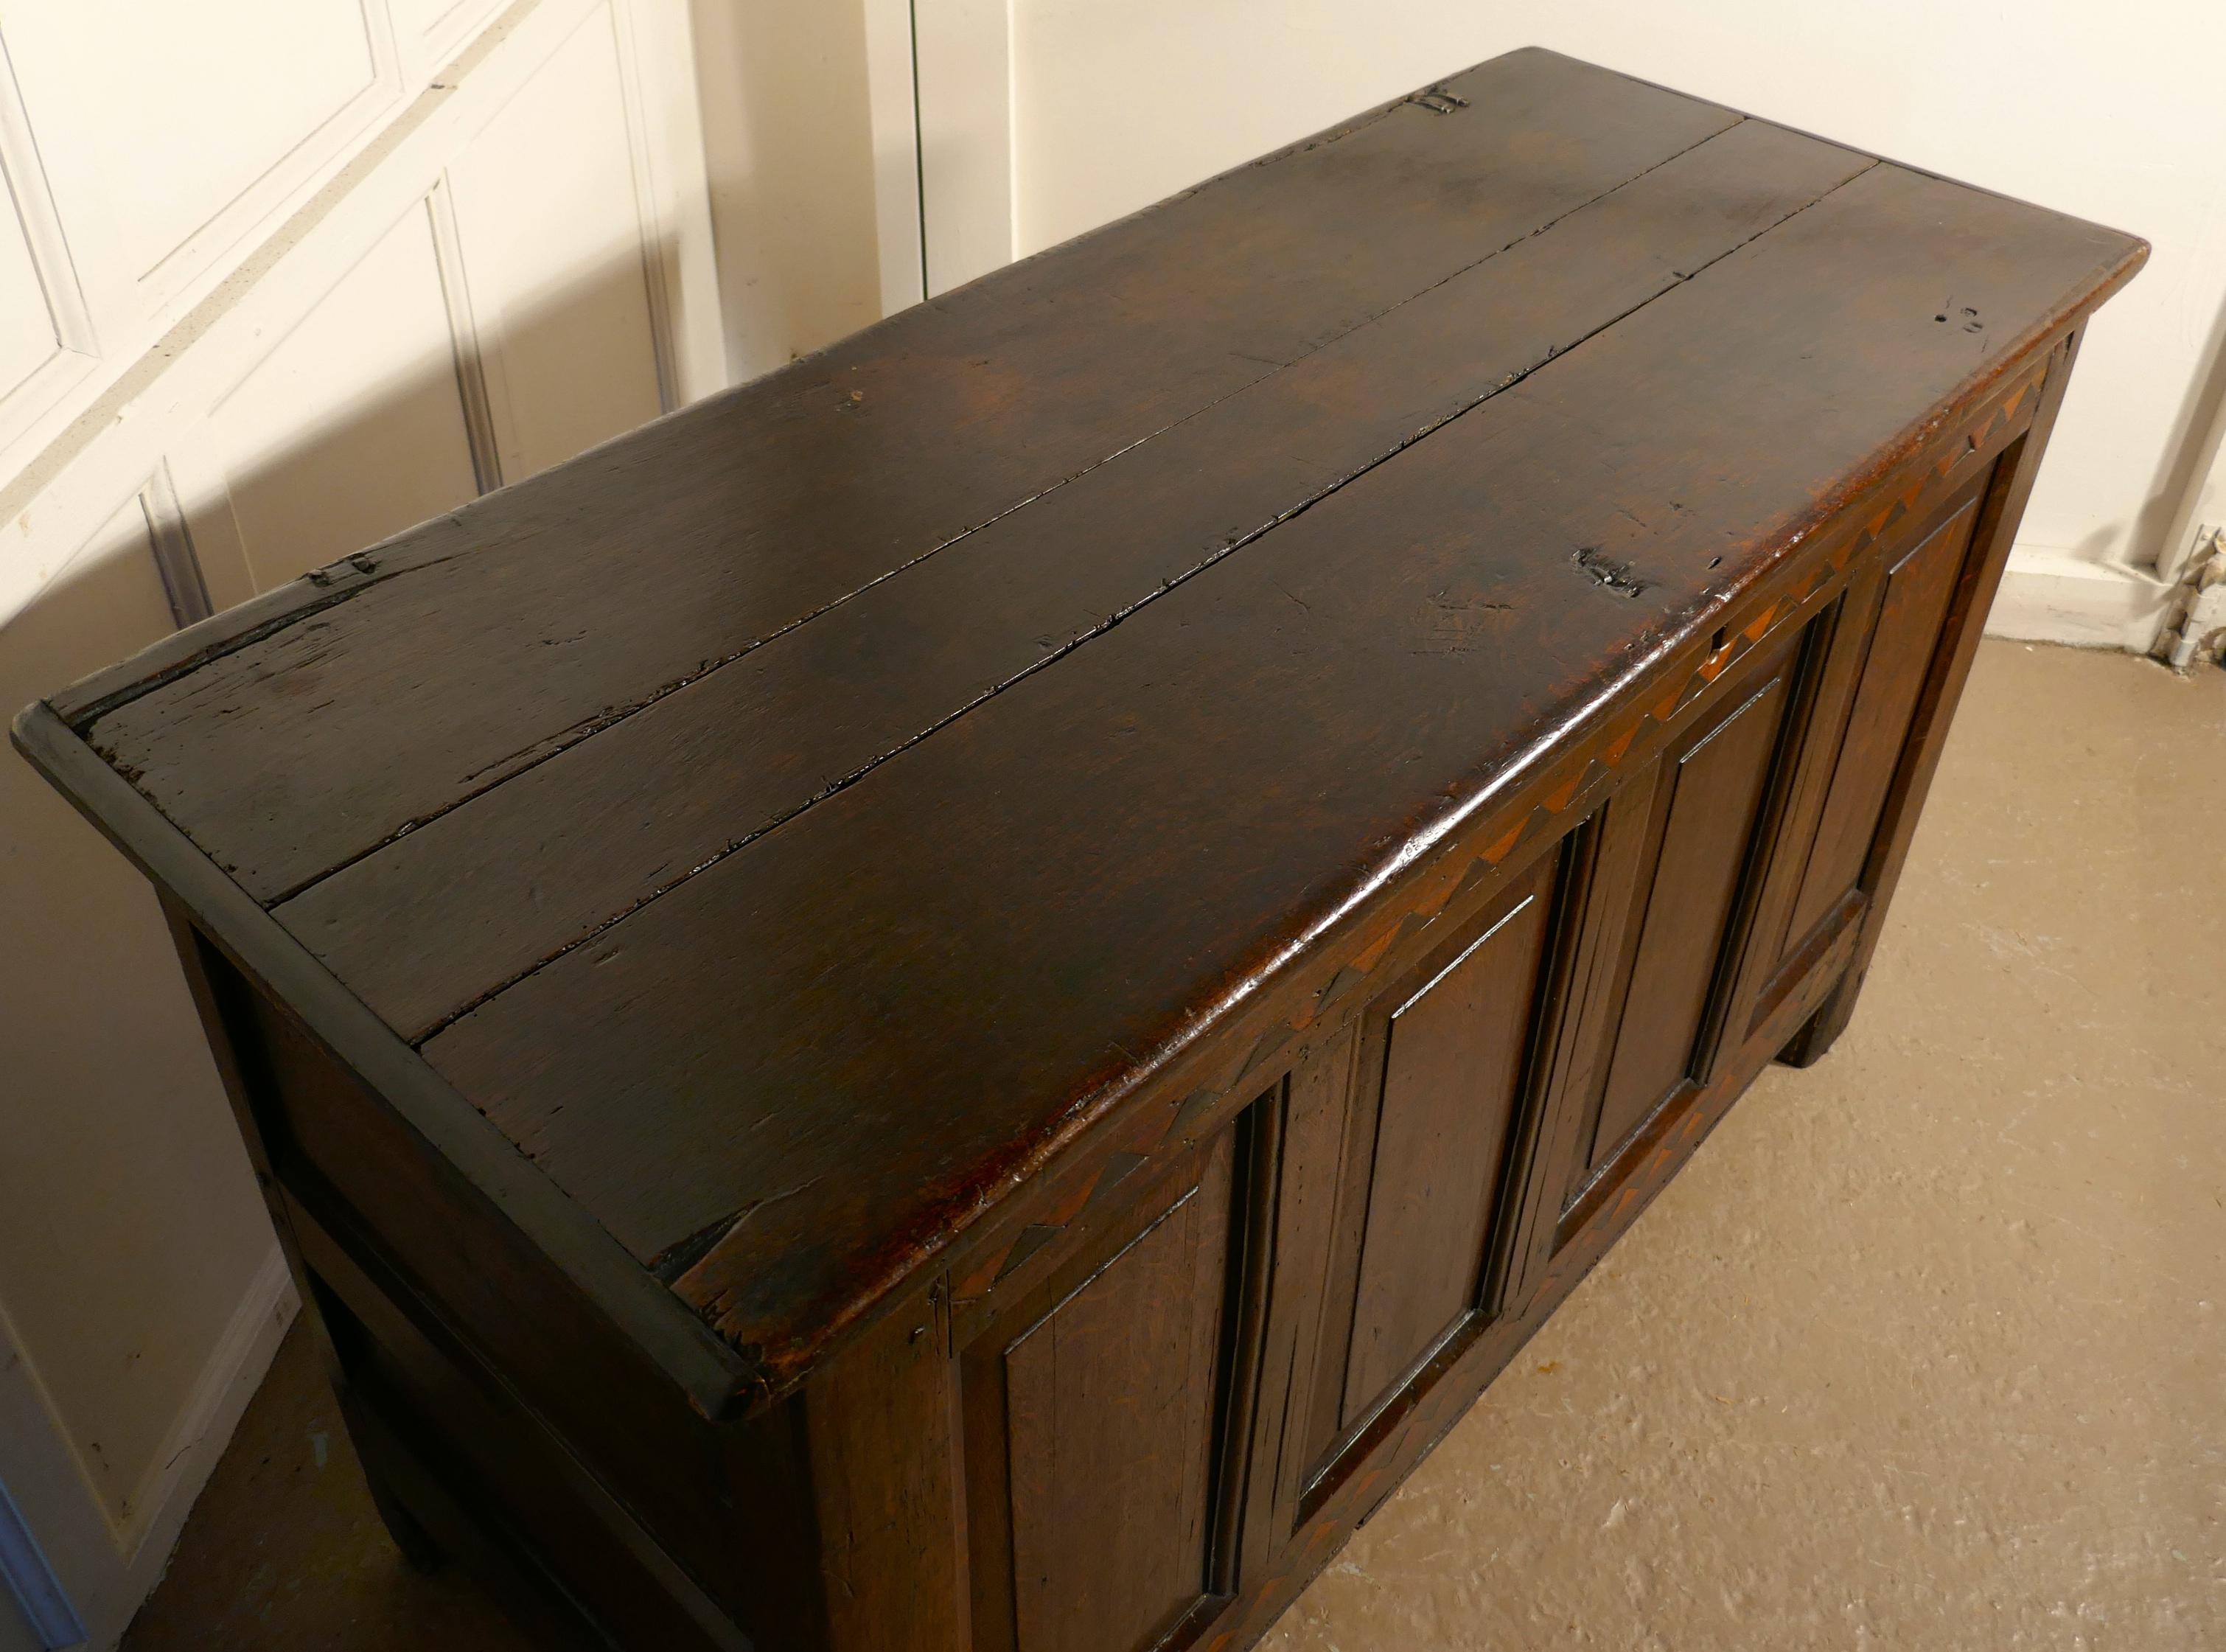 A large 17th century inlaid panelled oak coffer.

This is a lovely old piece, with a superb patina, the chest has three deep moulded panels on the front with a heavy oak plank top
The front also has a diamond inlaid border top and bottom, and it